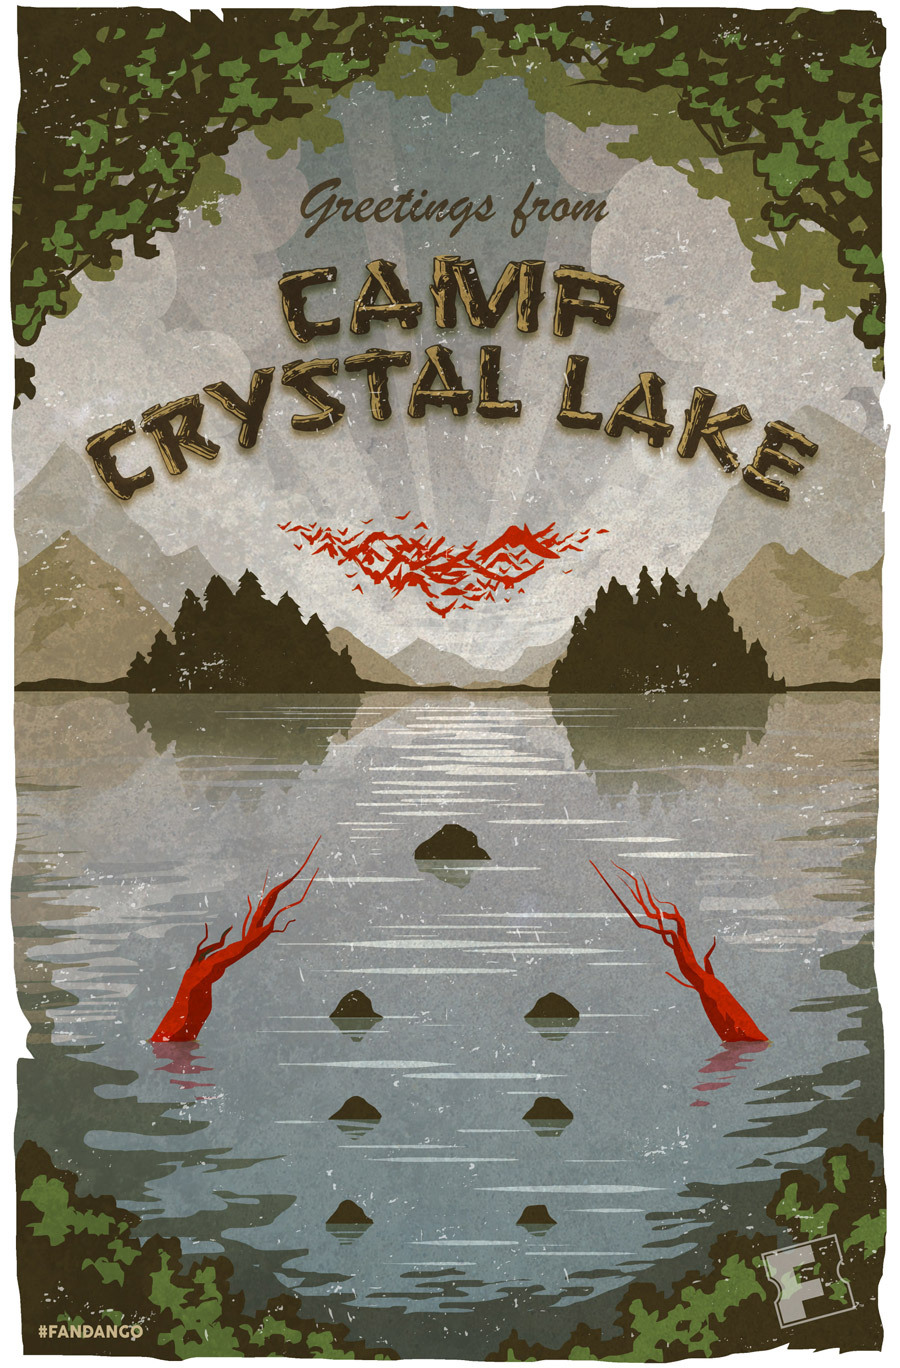 Fandango Remember that one time at Camp Crystal Lake when...